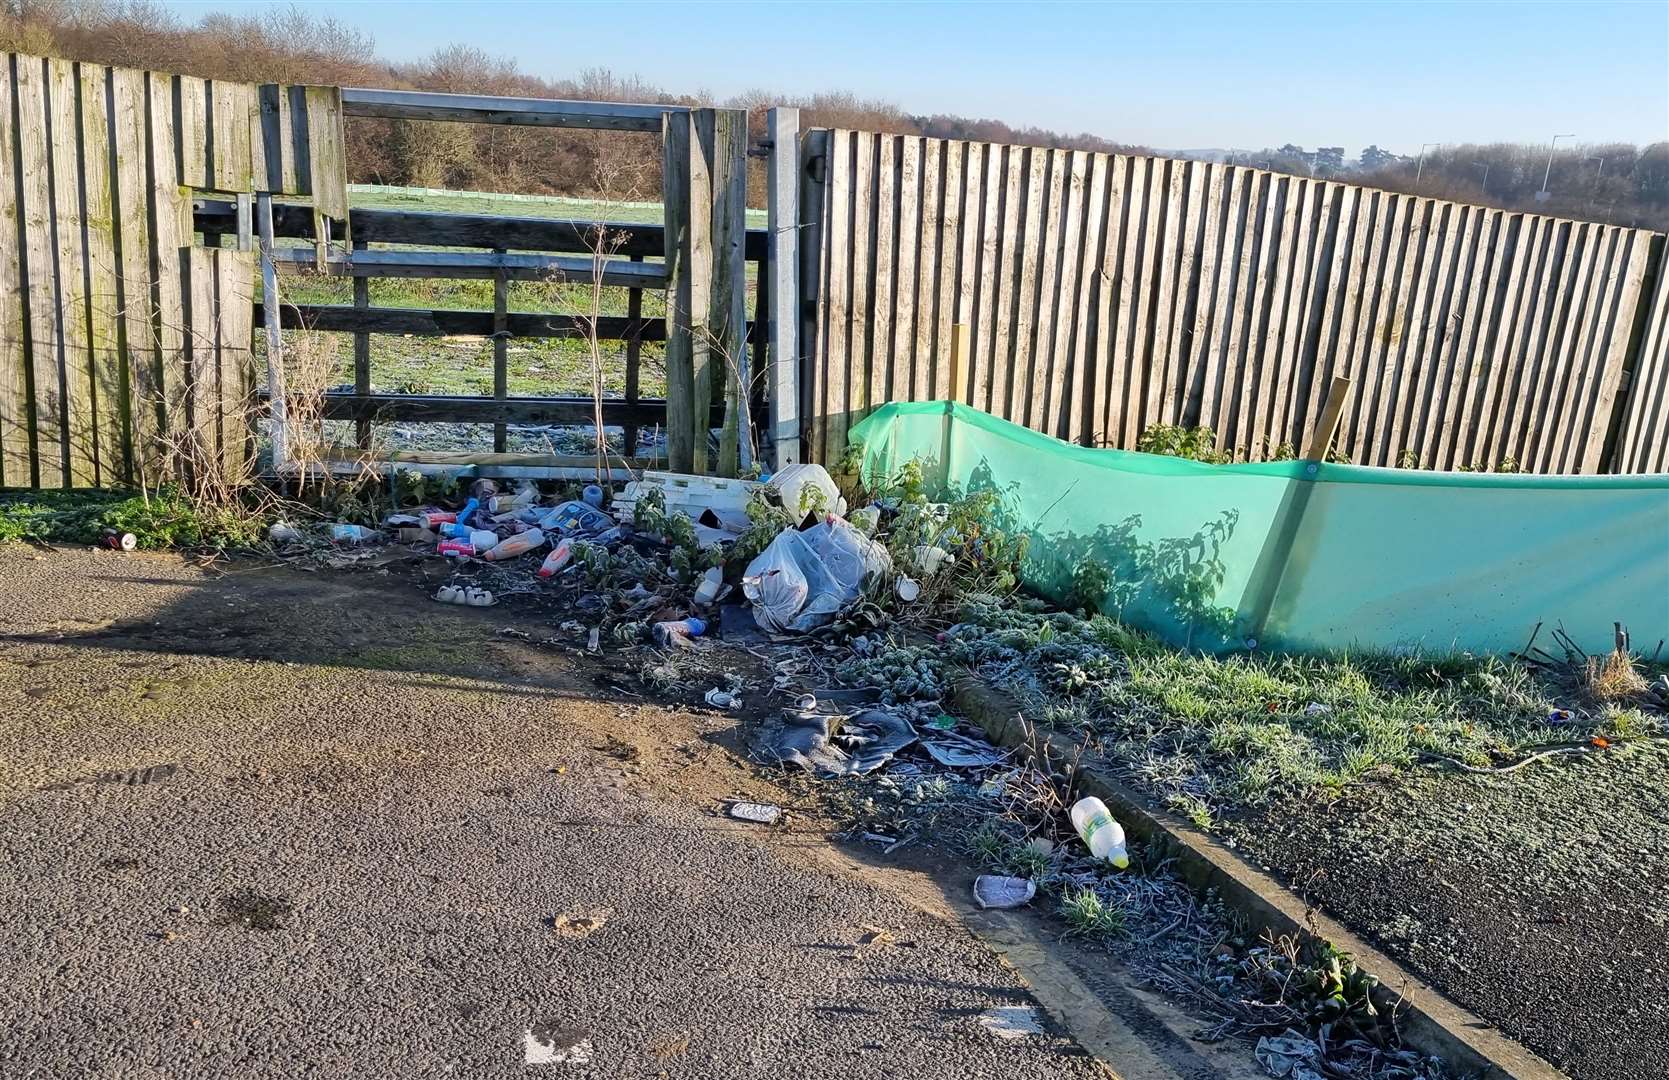 Rubbish has been dumped near the roundabout